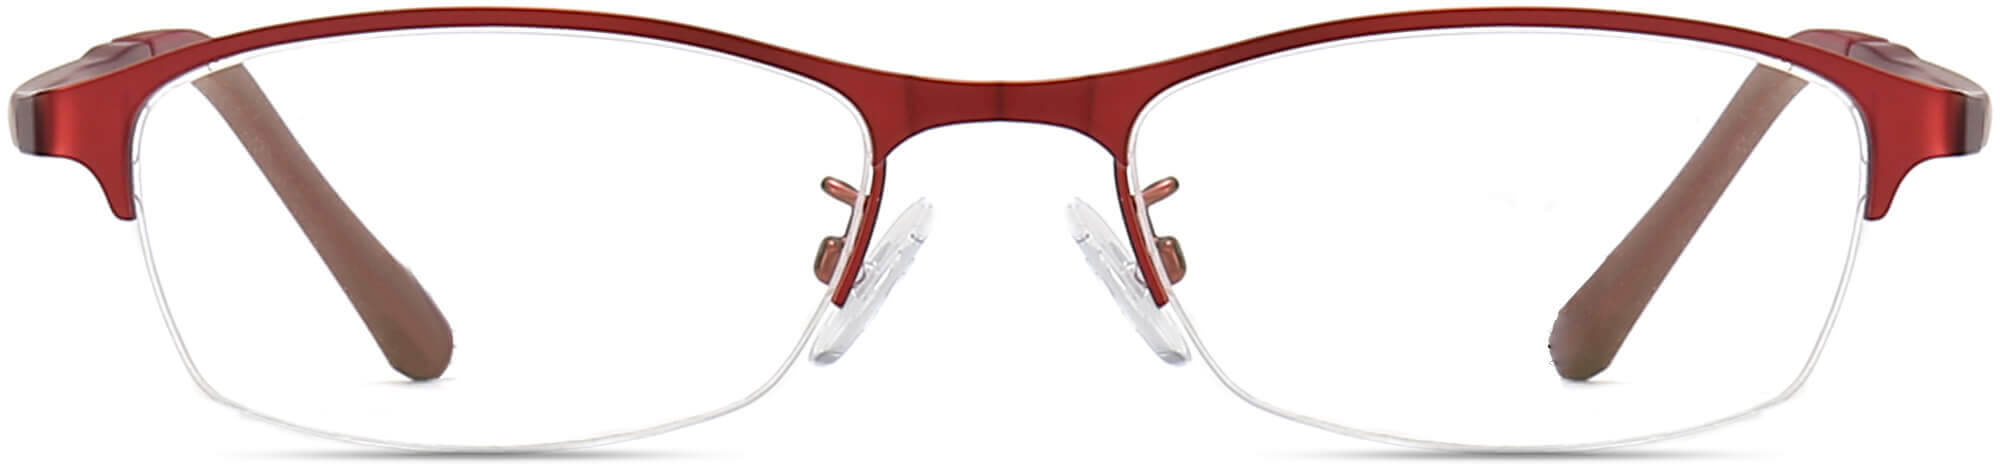 Lola Rectangle Red Eyeglasses from ANRRI, front view